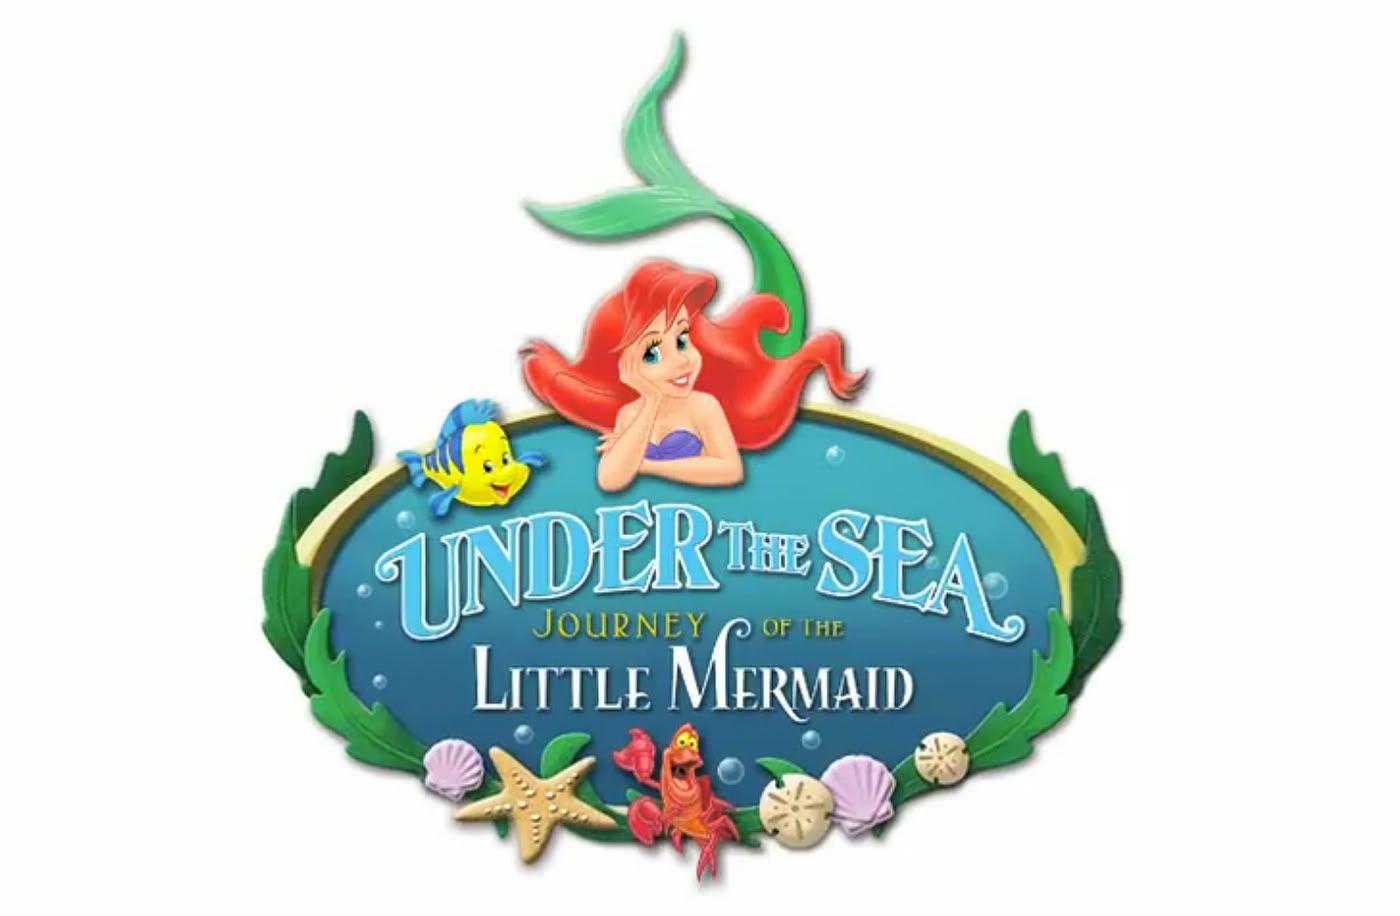 Disney Little Mermaid Logo - Disney and more: New Imagineering video reveals more about WDW ...